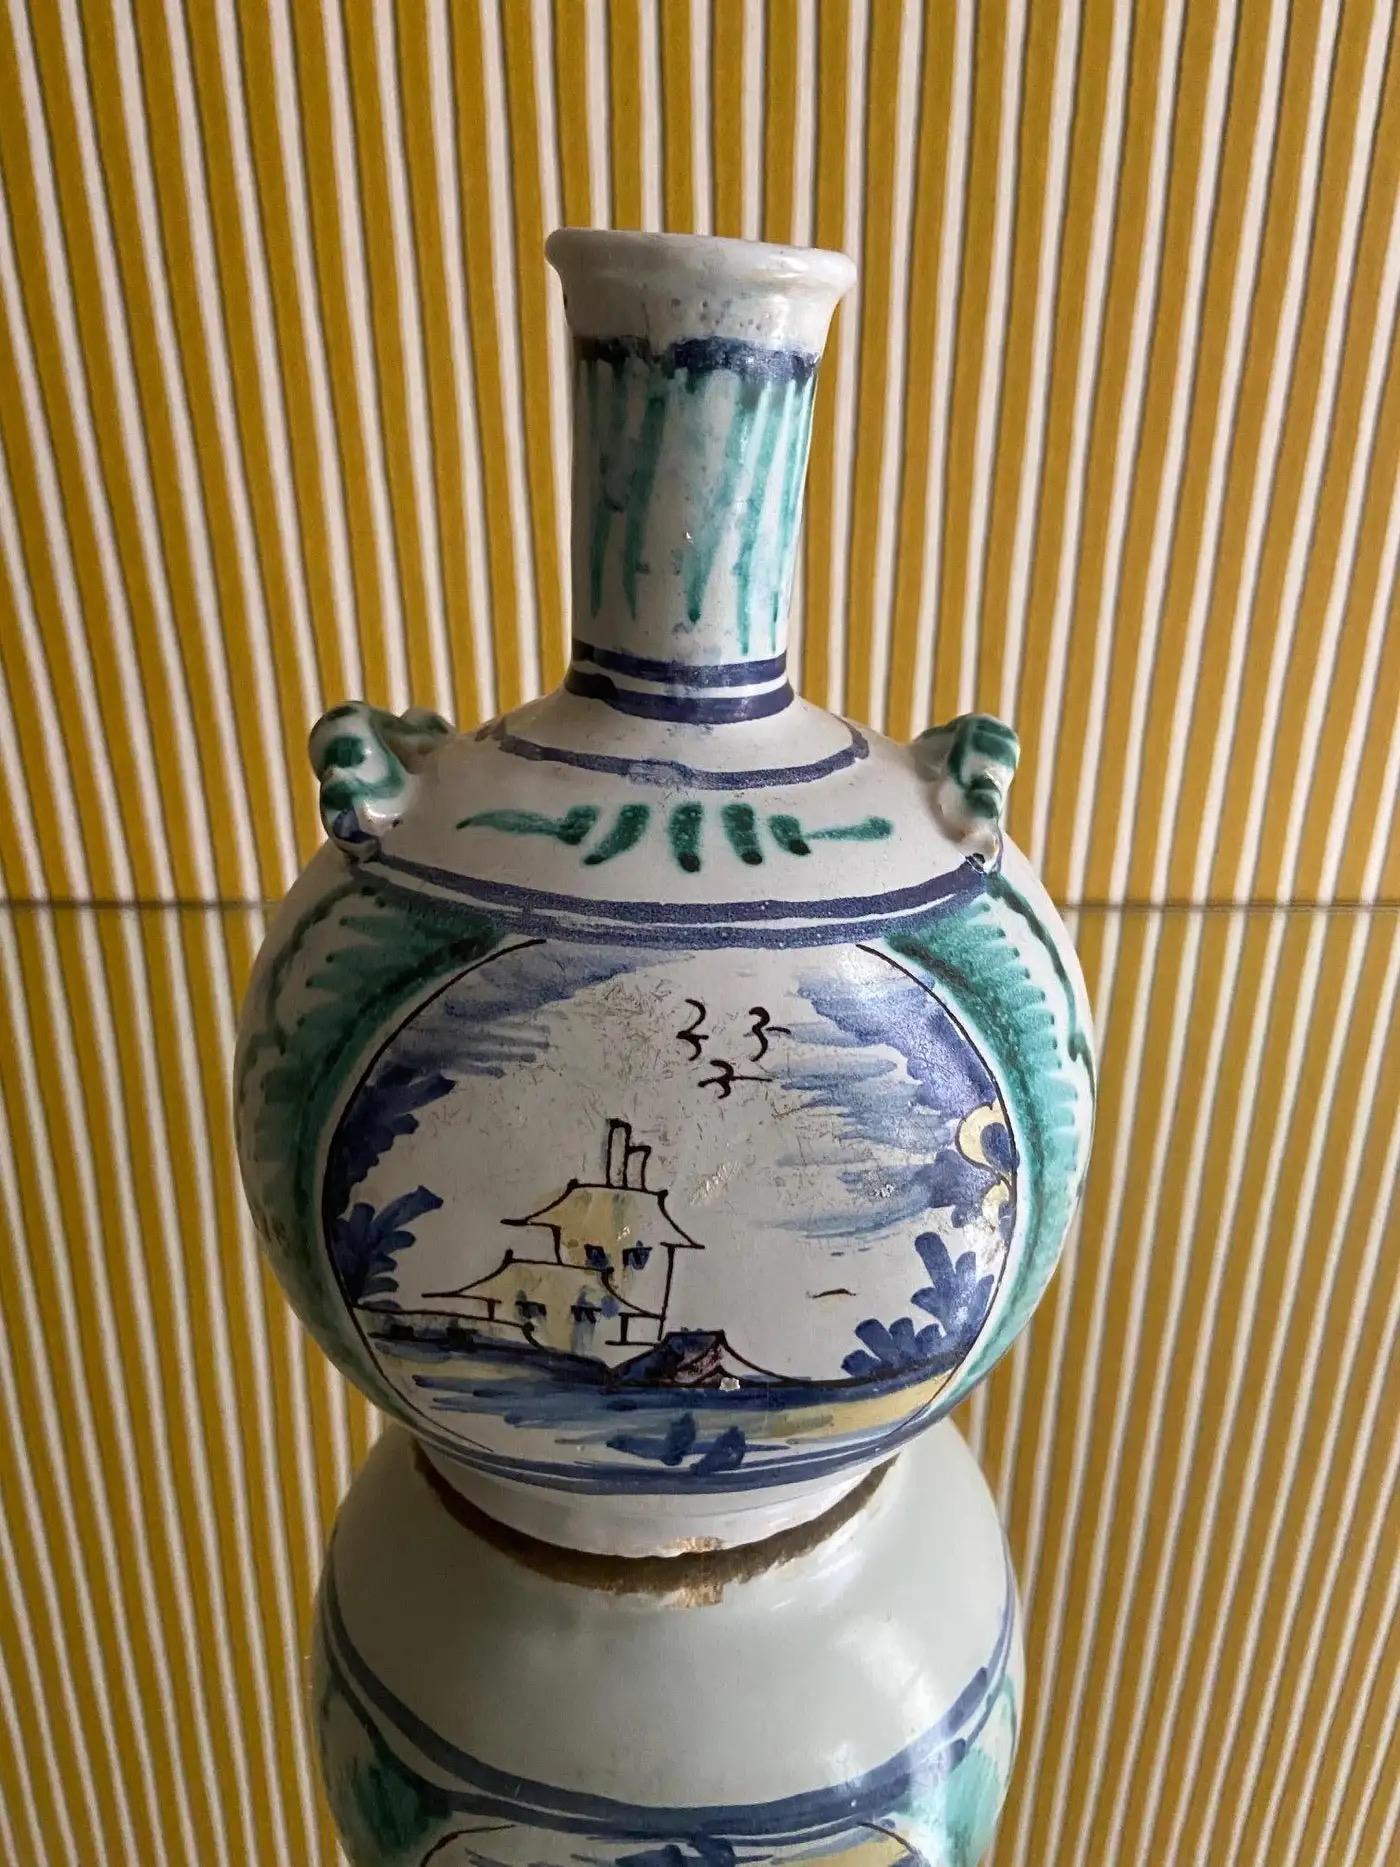 French Antique Handcrafted Ceramic Bottle Vase in Blue and Green, France, 18th Century For Sale